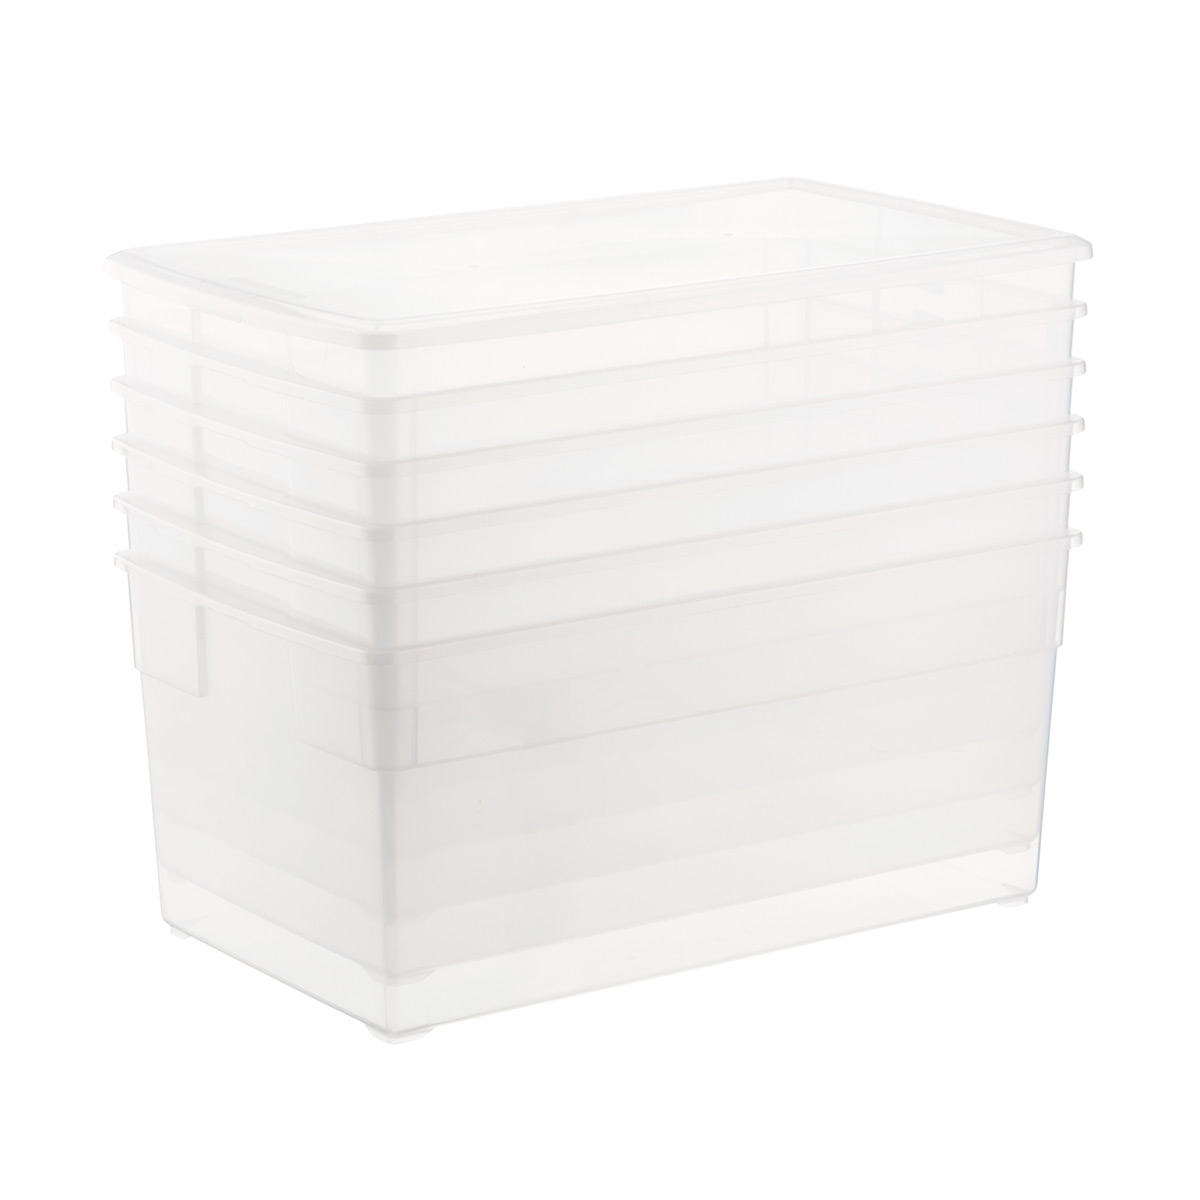 The Container Store Our Jumbo Box - 27-1/8 x 16 x 12-3/8 H - Each